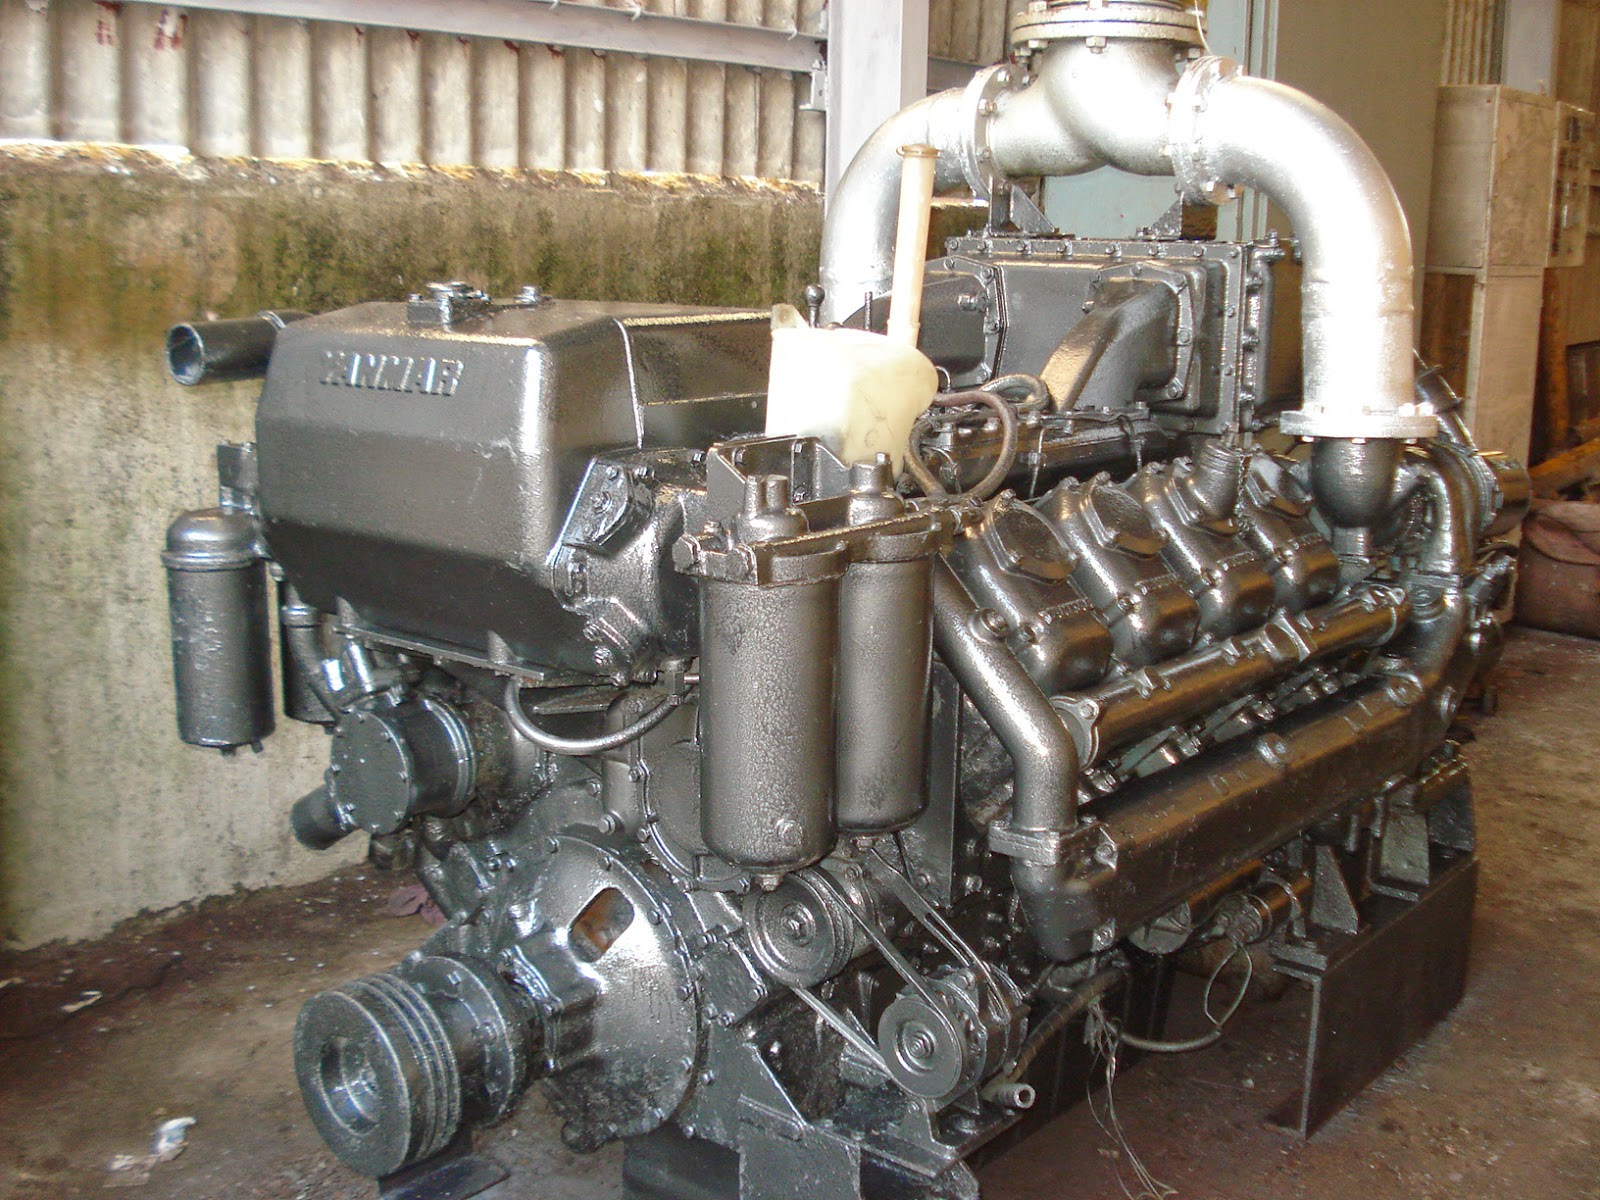 Yanmar Marine Engines and gearbox